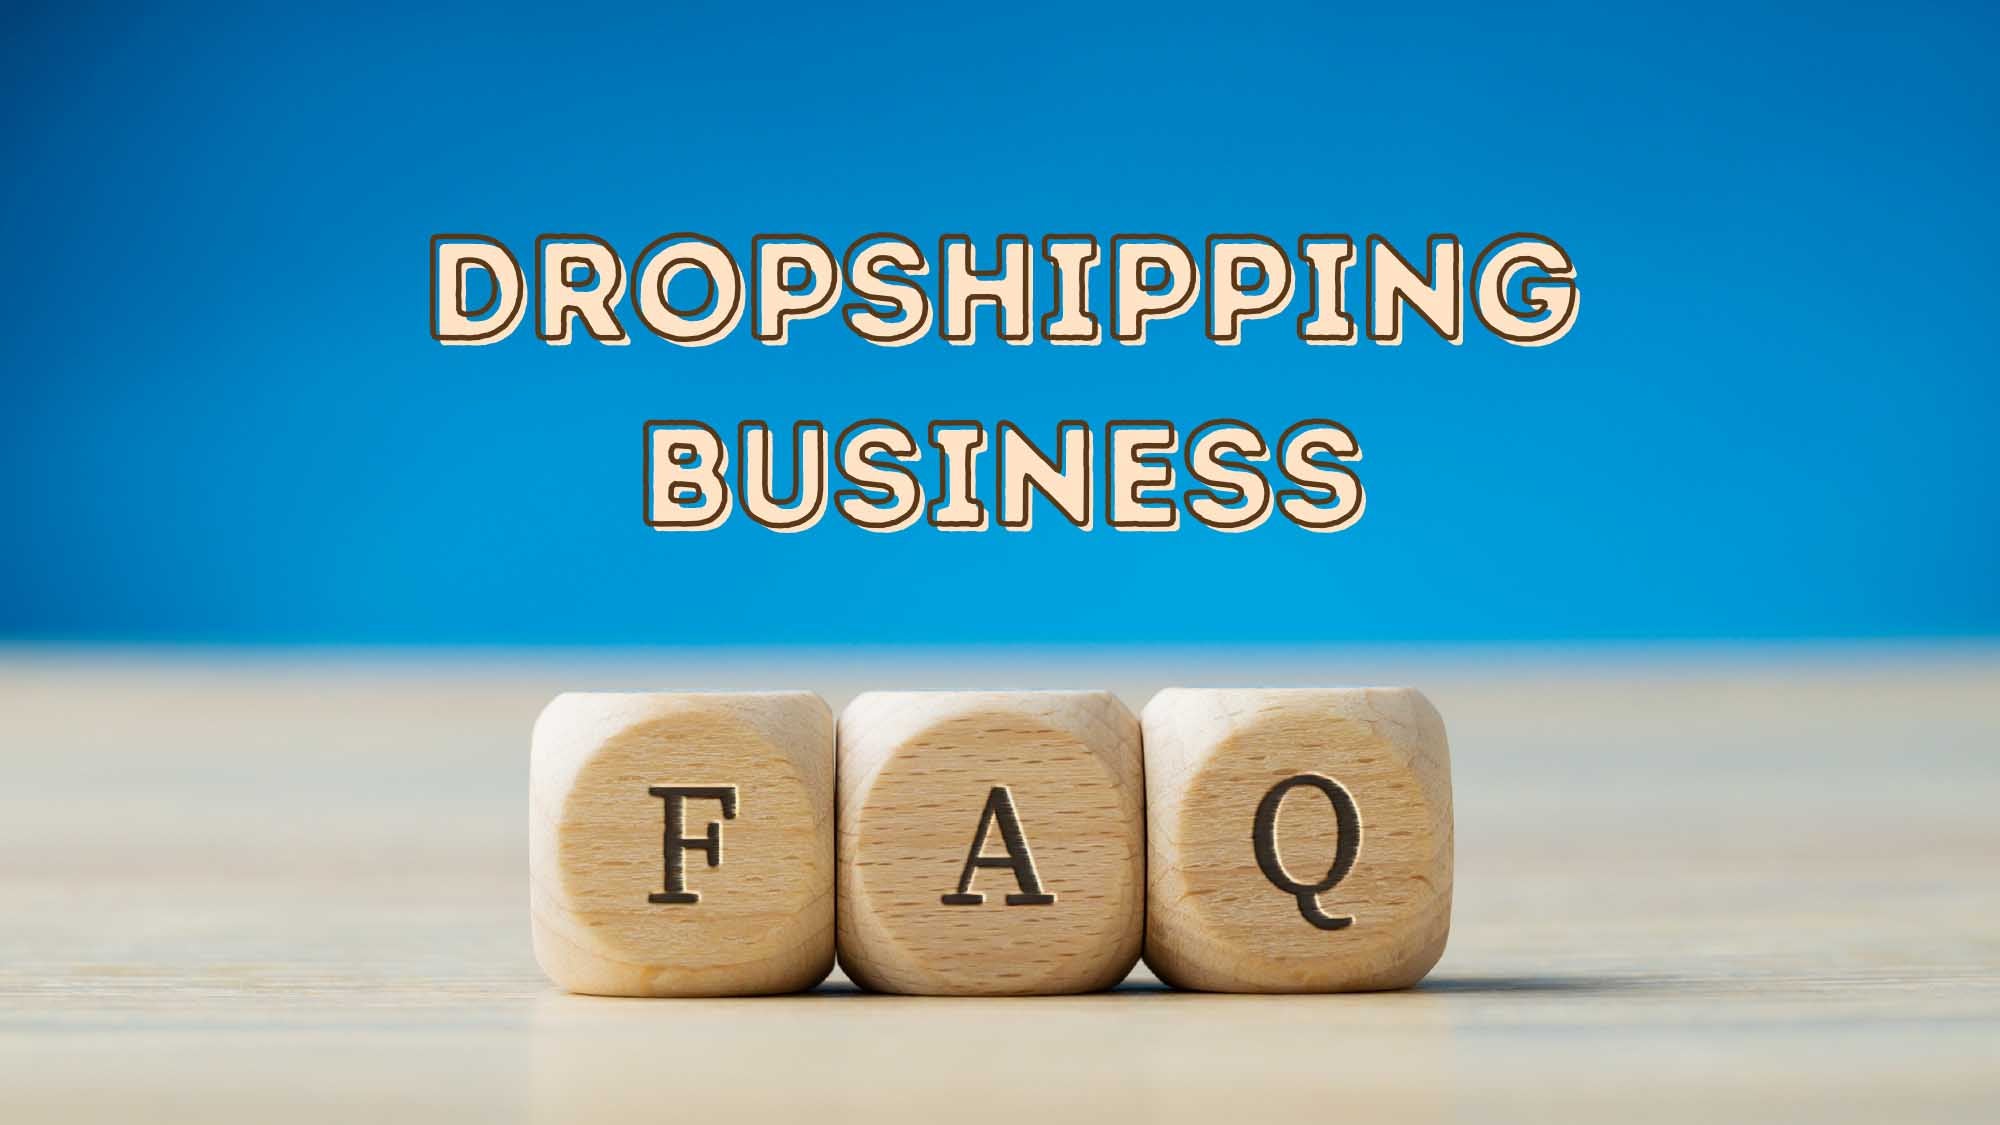 Frequently Asked Questions About Dropshipping Business